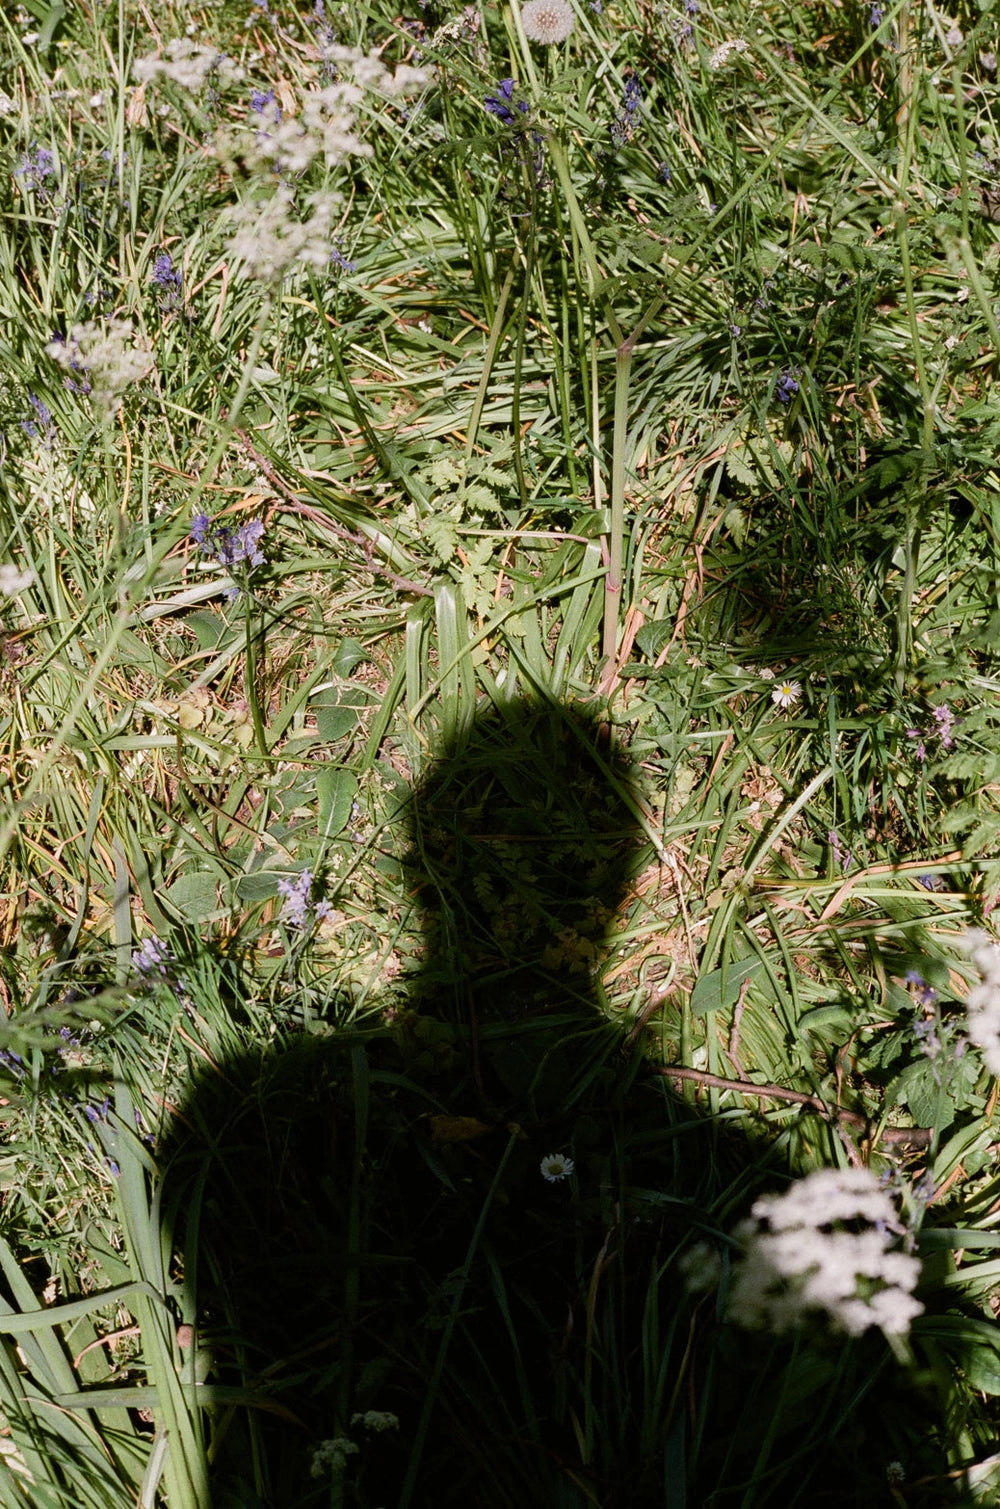 a photo of a person’s shadow in green grass from Lina Scheynius’ photo-essay for Tabayer Jewelry